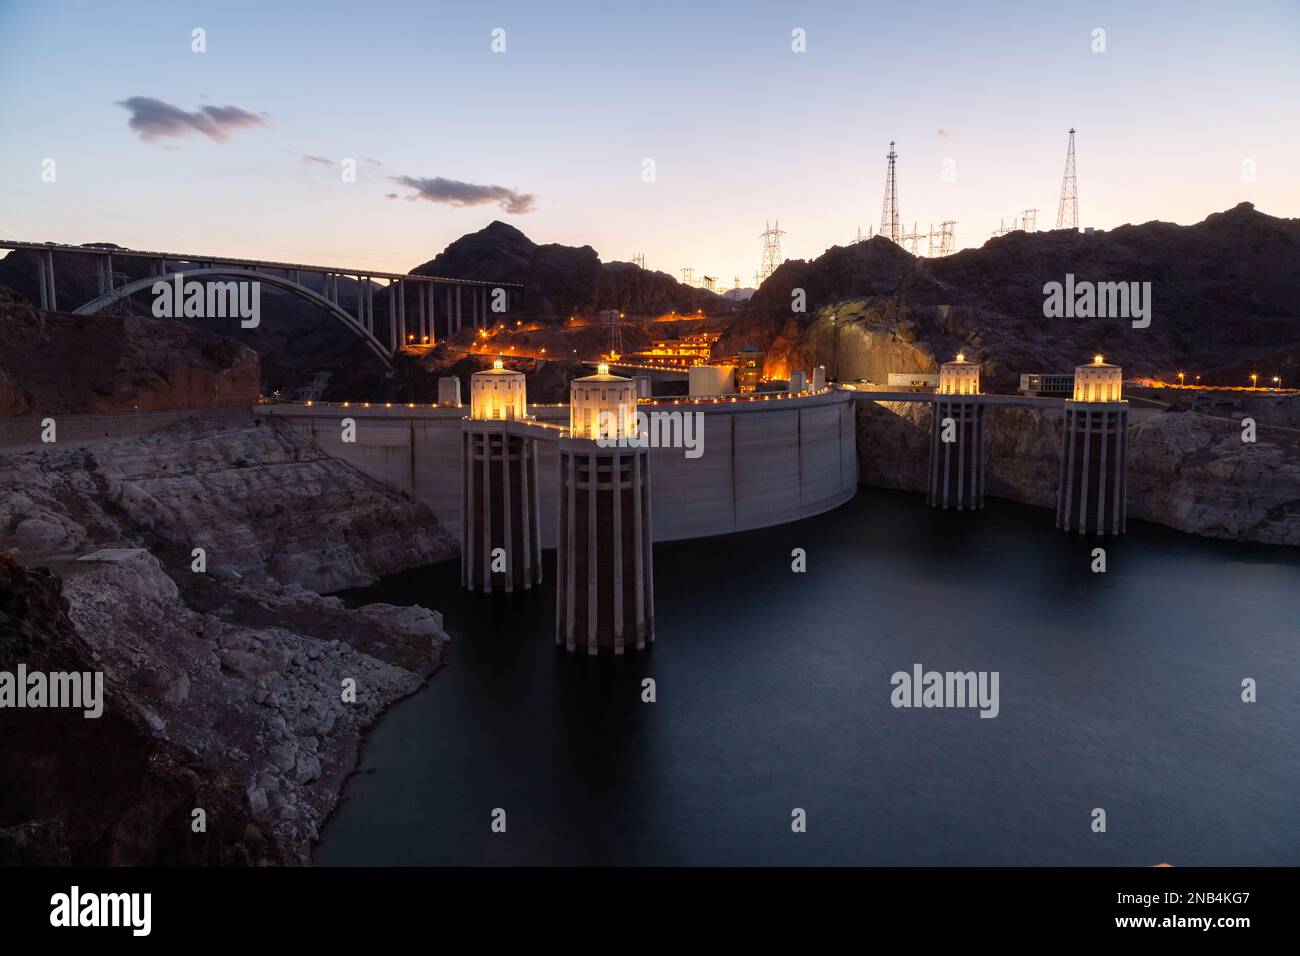 Hoover Dam at sunset in the evening with illuminations without people. Hoover dam, view point. Hoover dam and Lake Mead in Las Vegas area. Large Comstock Intake Towers At Hoover Dam. Stock Photo